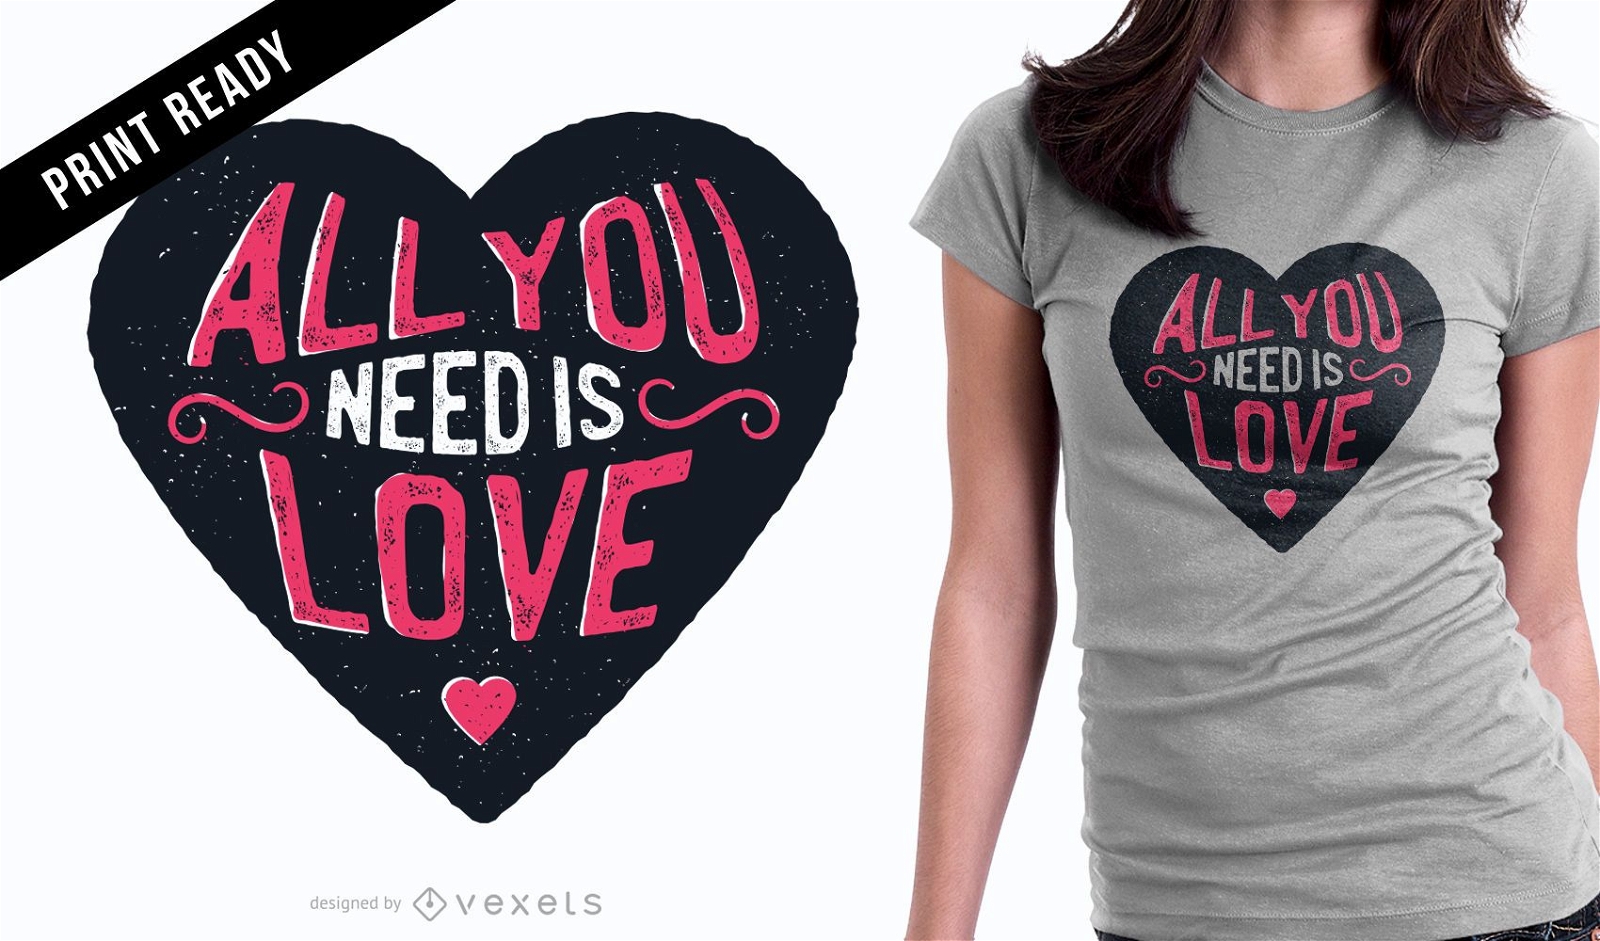 All You Need love t-shirt design